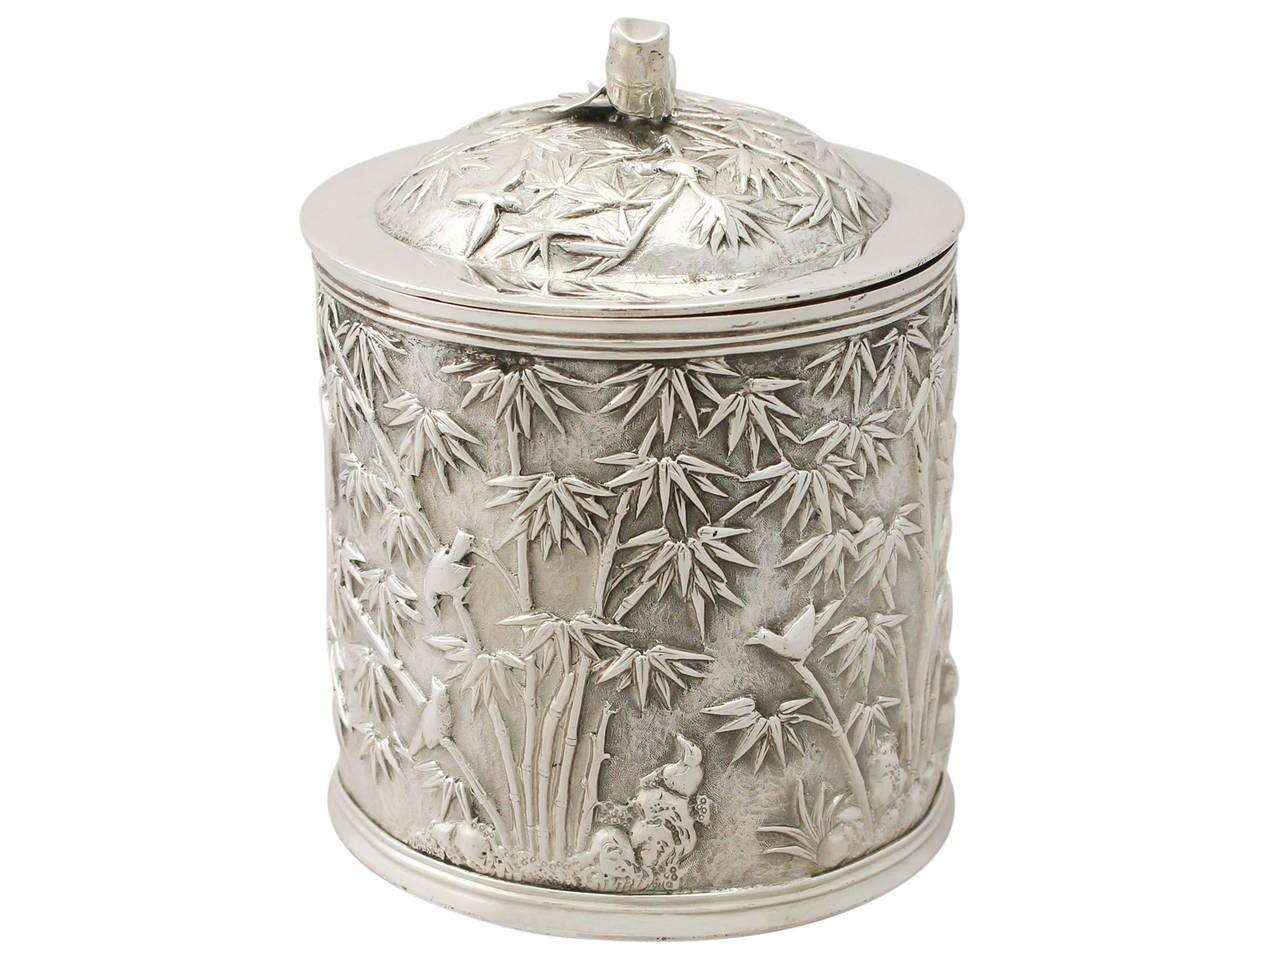 A fine and impressive antique Chinese Export Silver tea caddy; an addition to our diverse silver teaware collection.

This fine antique Chinese Export Silver (CES) tea caddy has a cylindrical form.

The surface of the body is embellished with